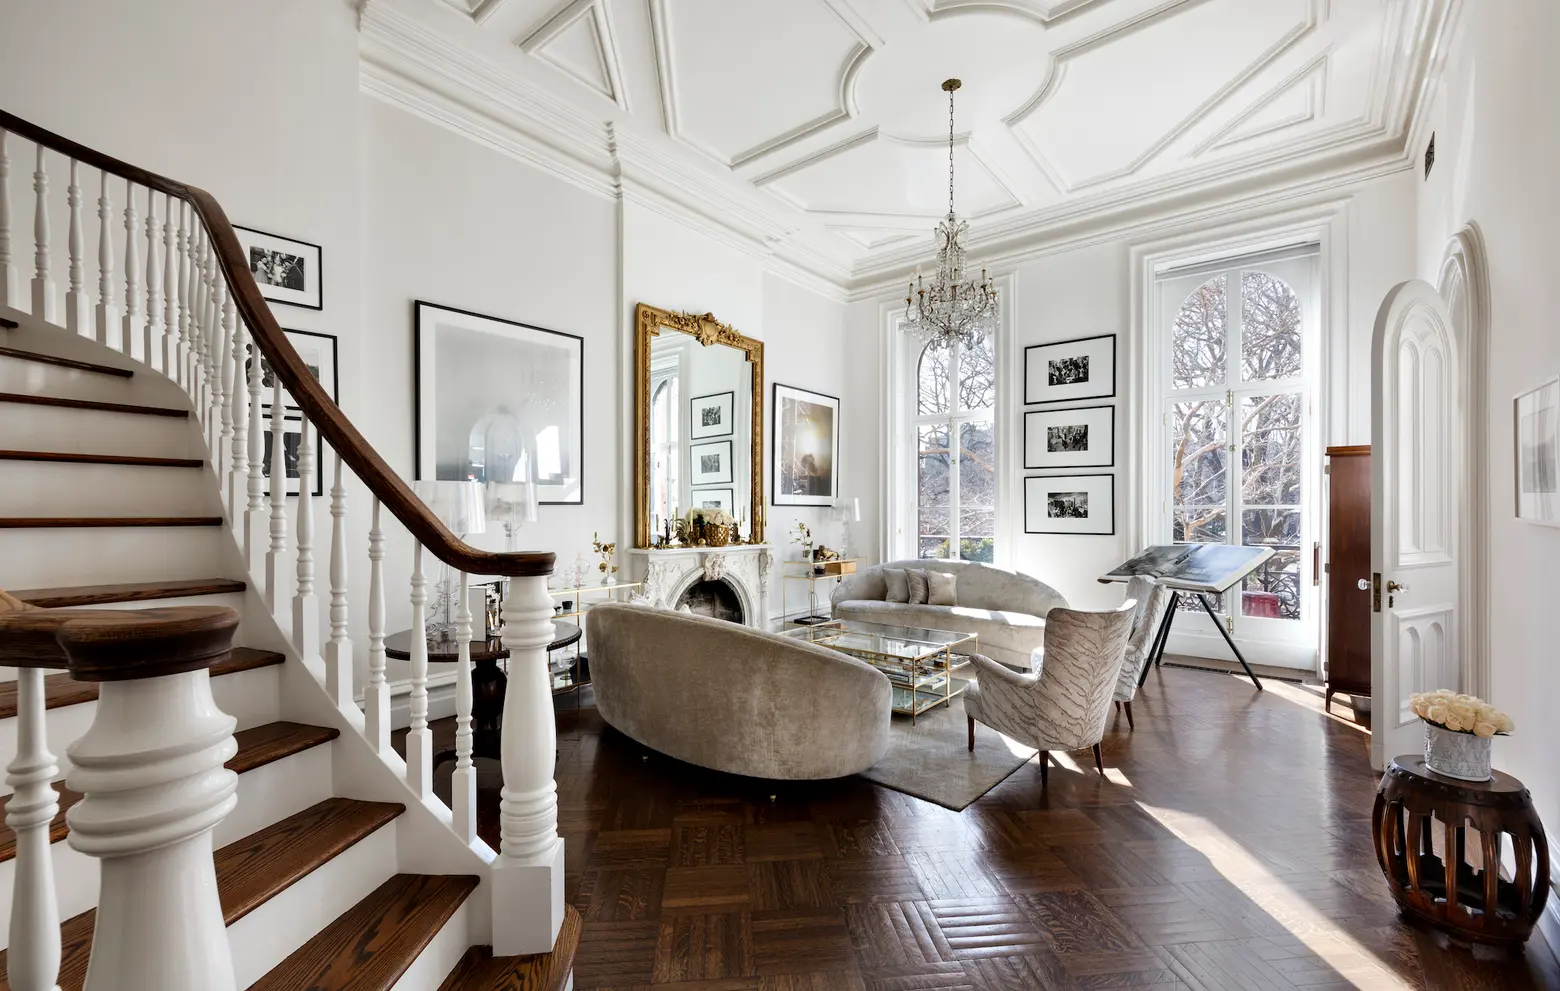 Baz Luhrmann’s Gramercy townhouse hits the rental market for $75K/month